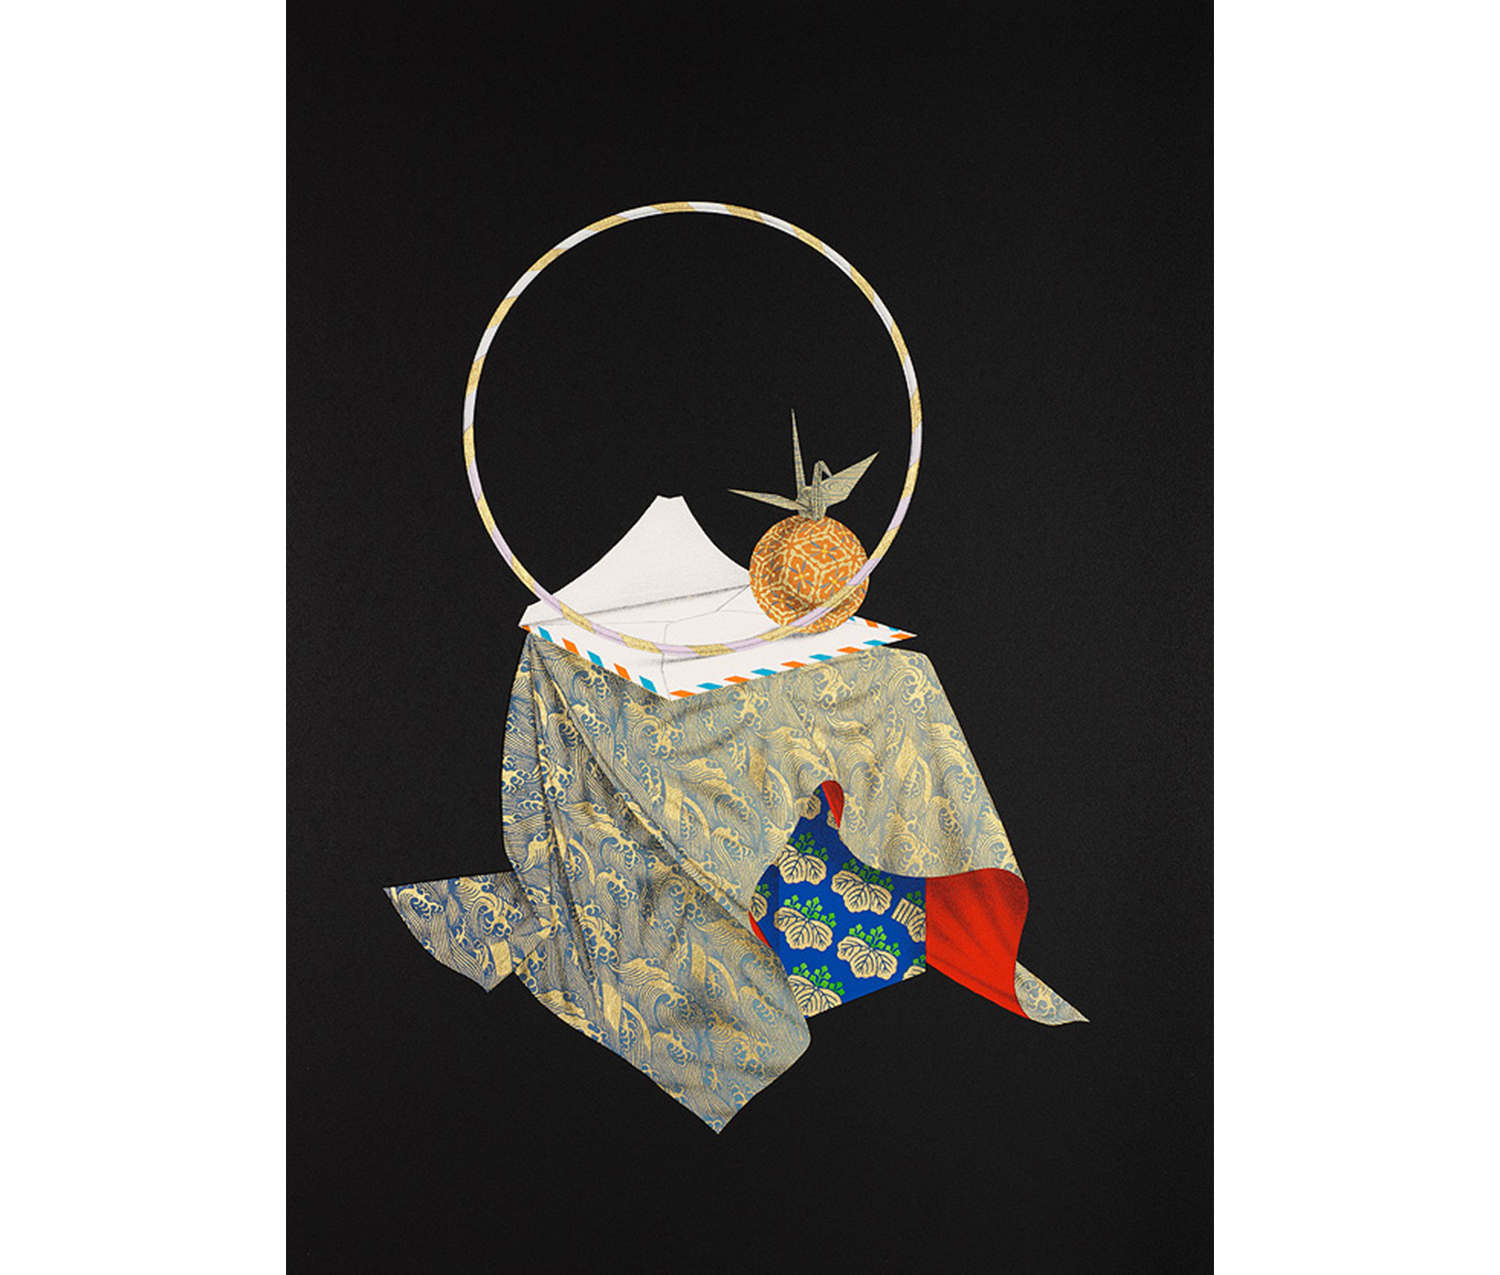 black background with floating gold and blue wave patterned cloth over a blue with gold and green leaf patterned box, a white open airmail envelope on top holding a white an gold hoop and a folded heron on a gold, blue and orange patterned ball